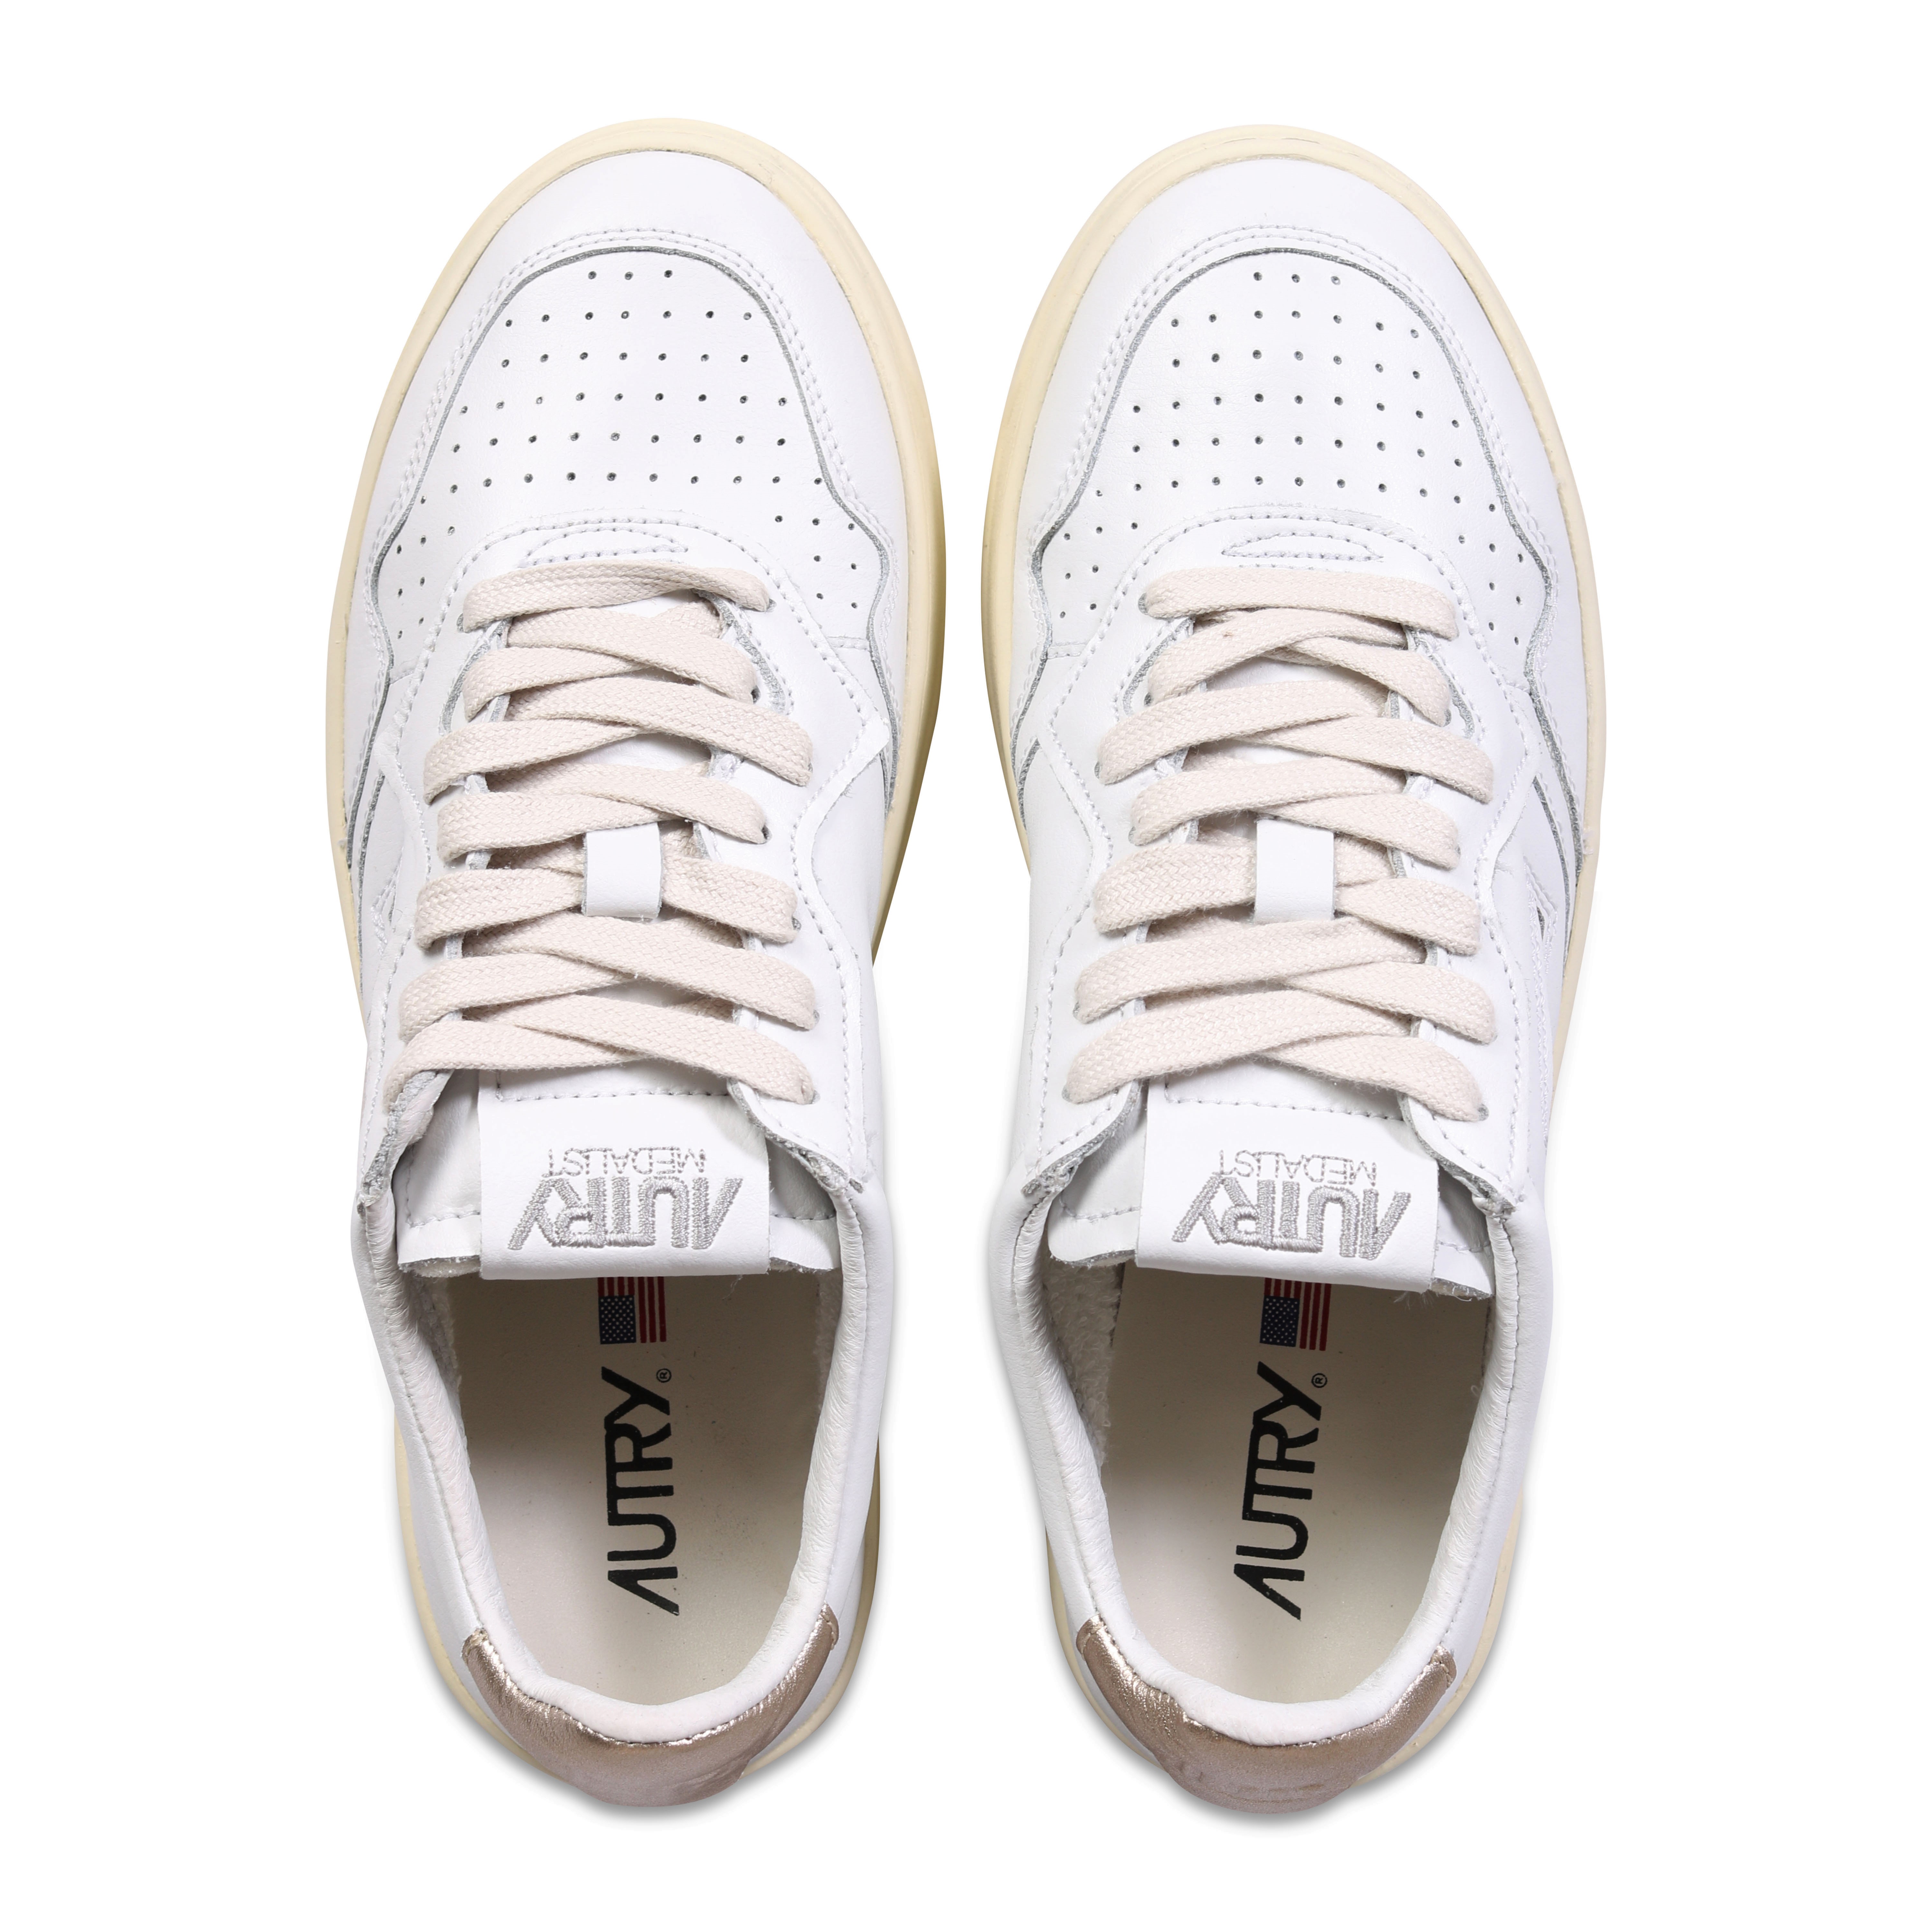 Autry Action Shoes in White/Gold